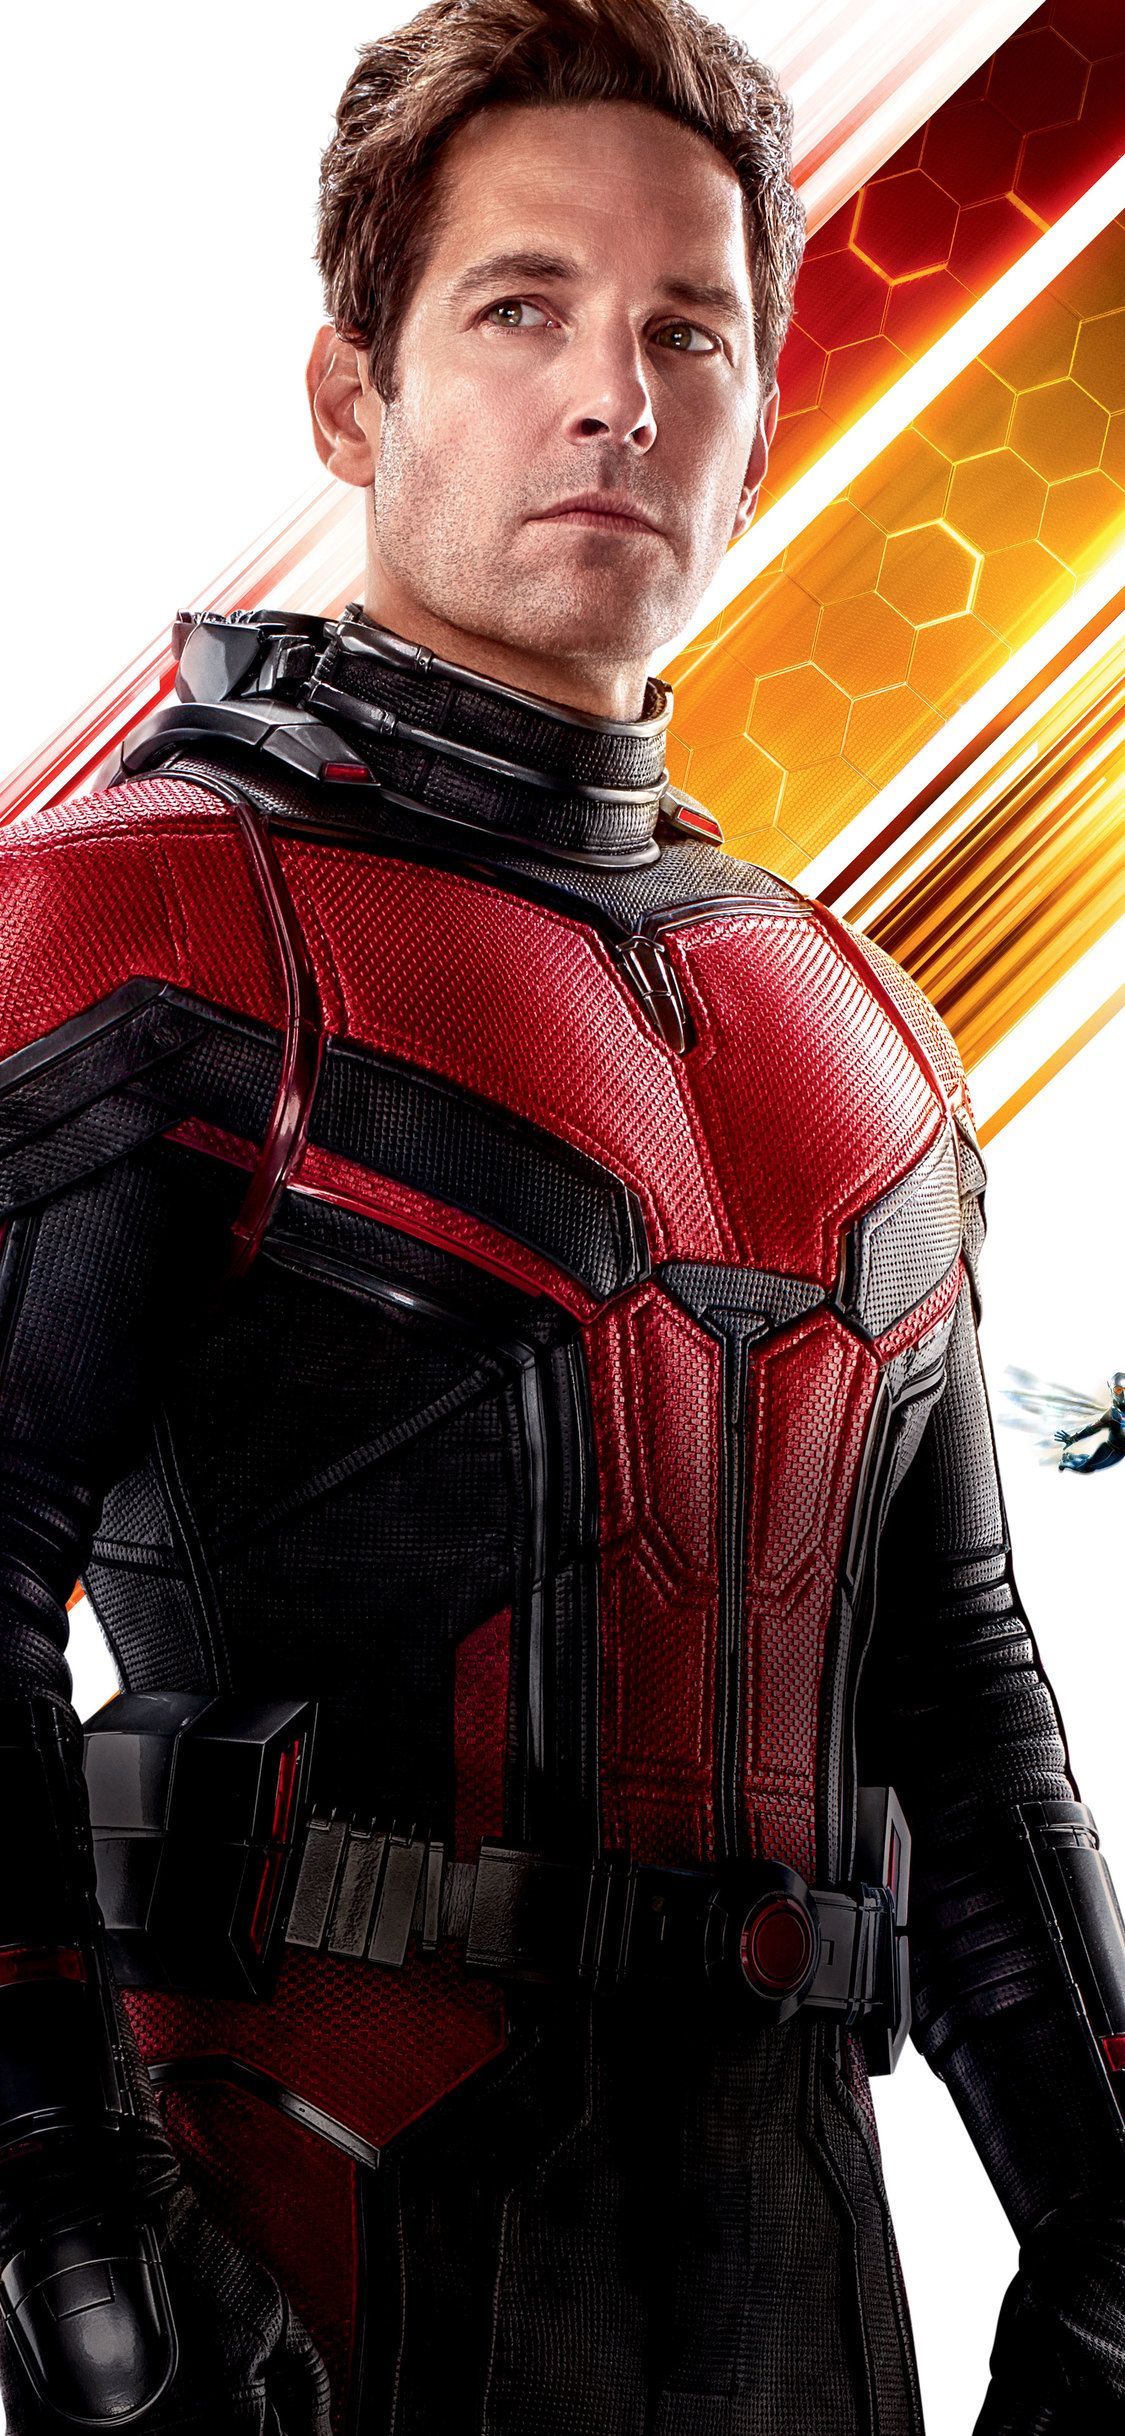 Paul Rudd As Antman In Ant Man And The Wasp 10k iPhone XS, iPhone iPhone X HD 4k Wallpaper, Im. Ant man marvel, Paul rudd ant man, Ant man scott lang